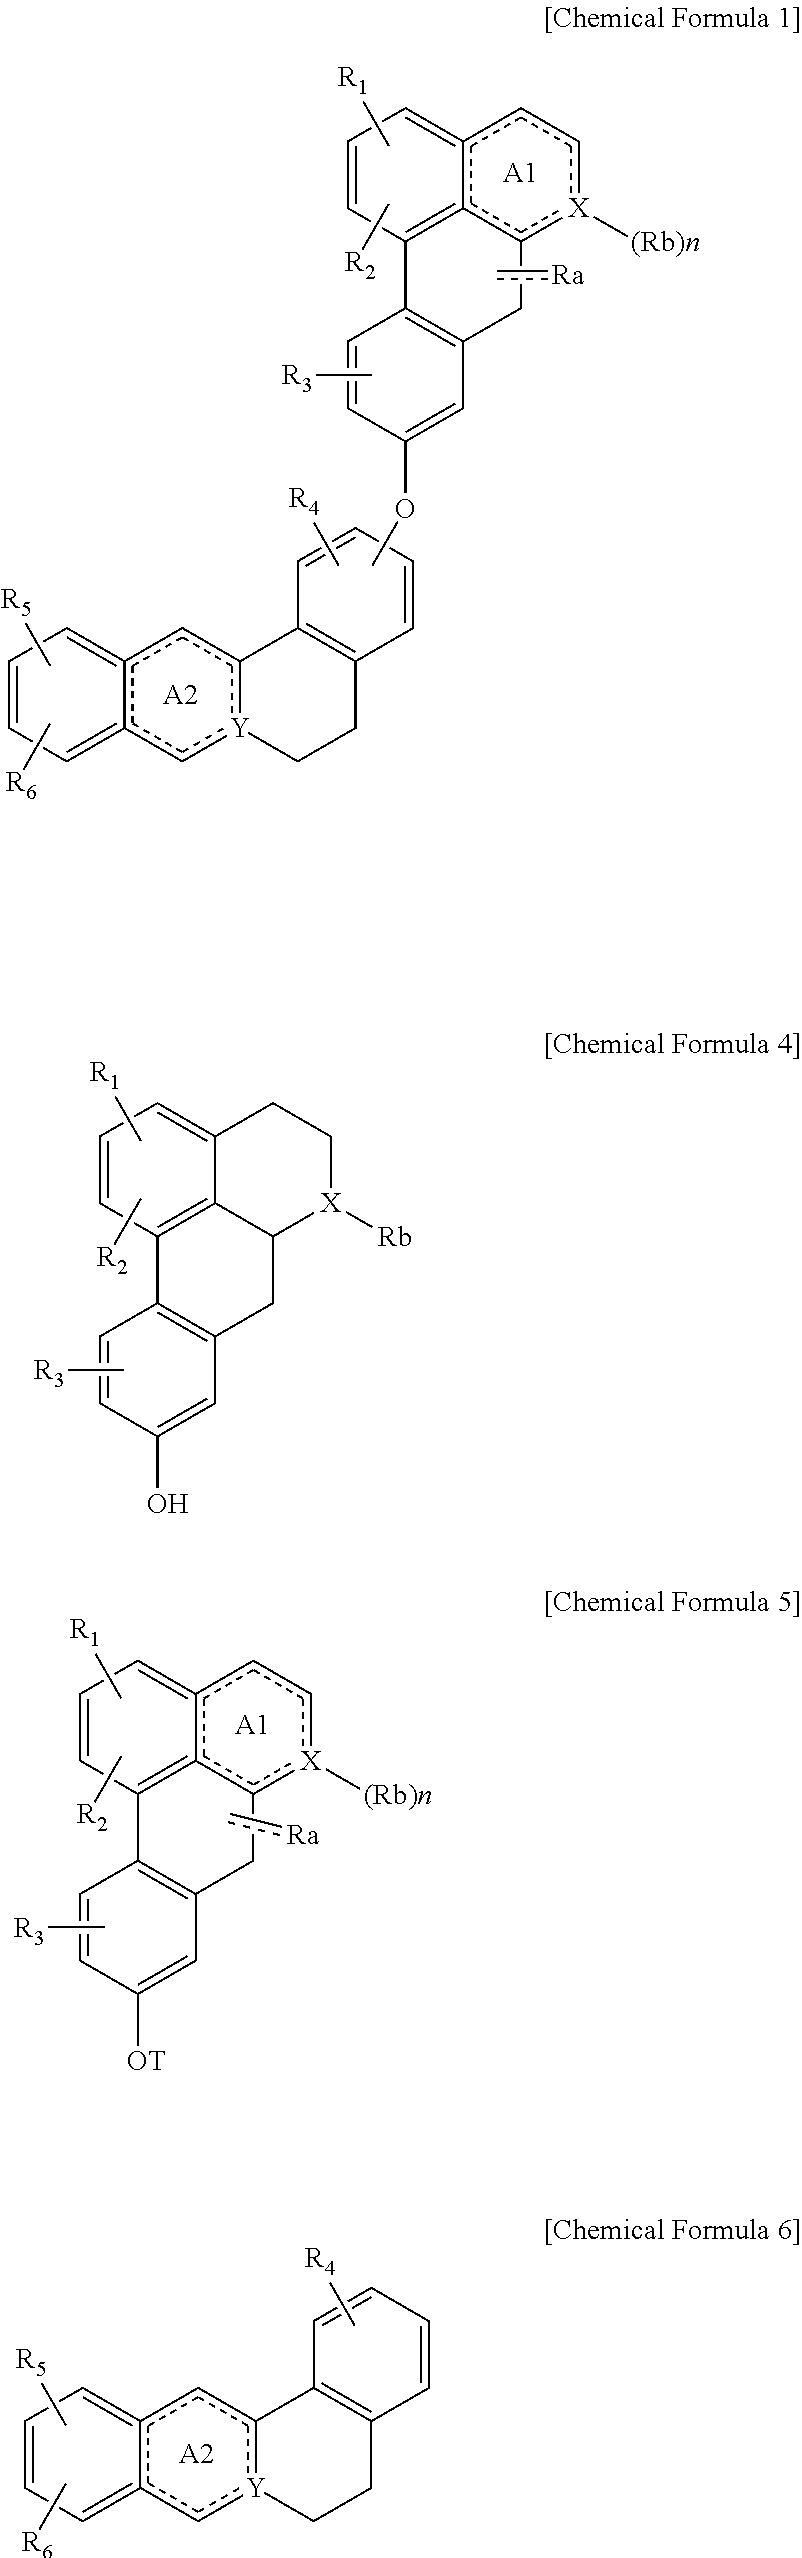 Quinoline derivative compound, method for preparing same, and pharmaceutical composition containing same